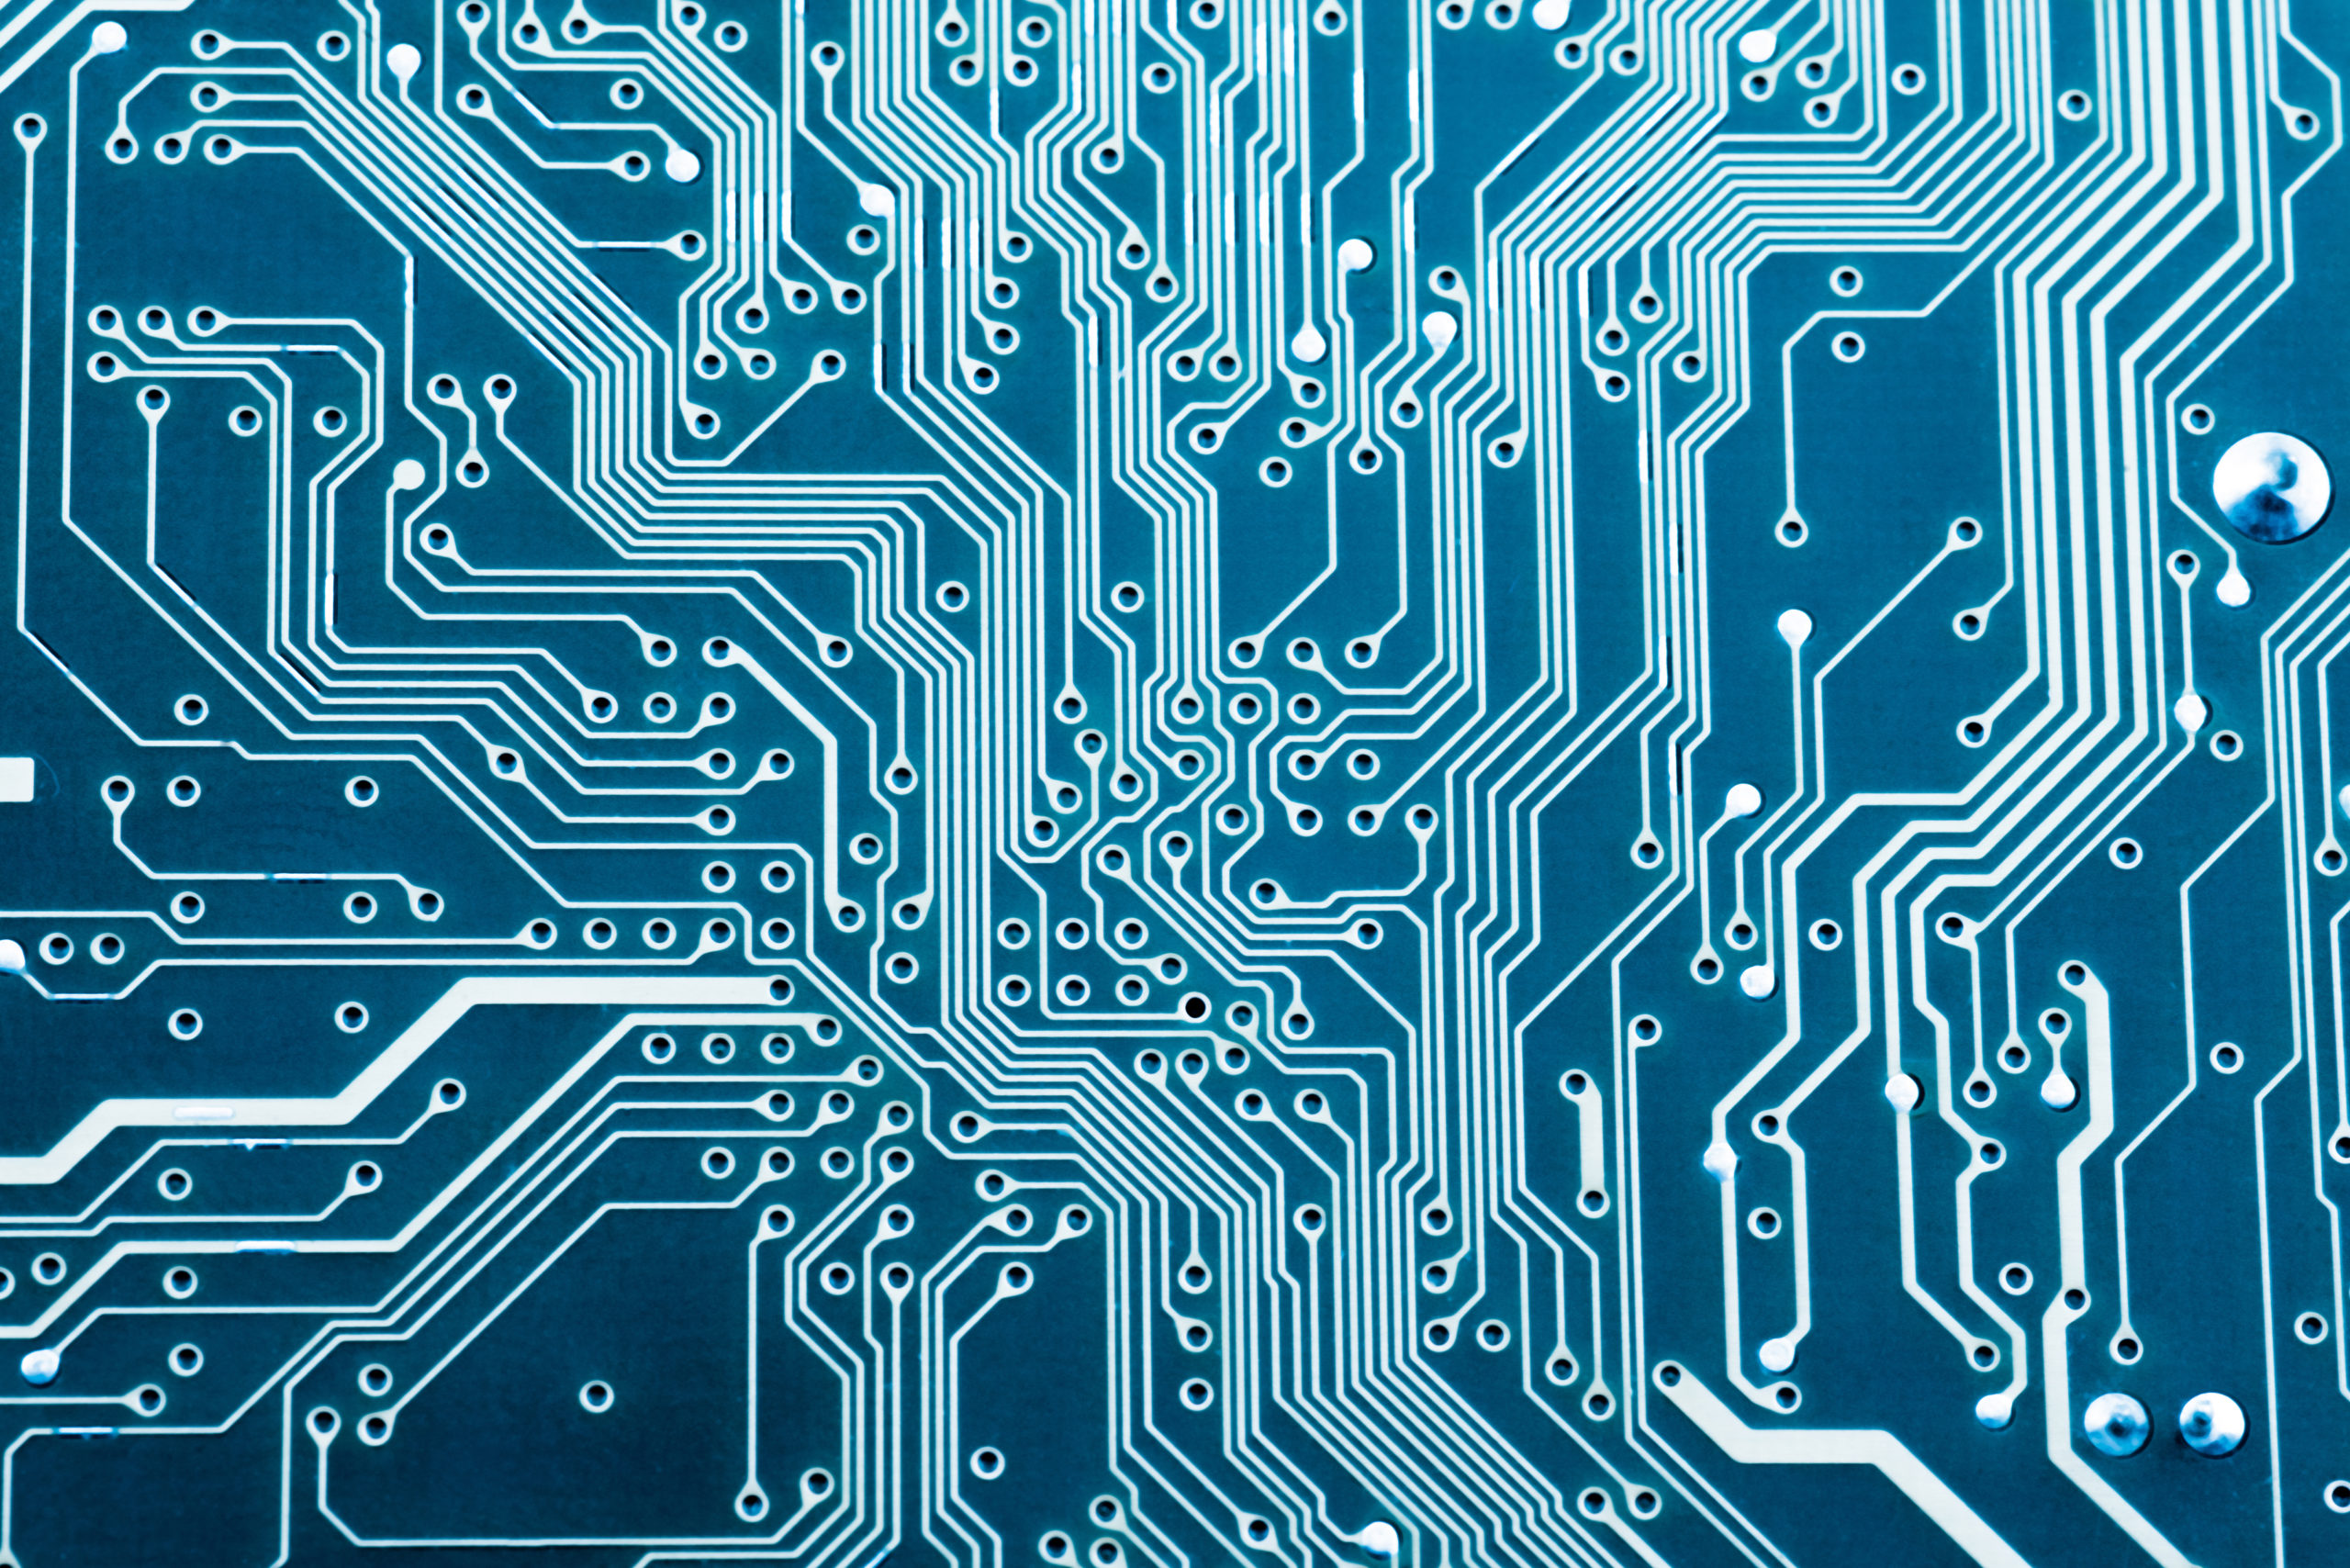 featured image of abstract background with circuit board